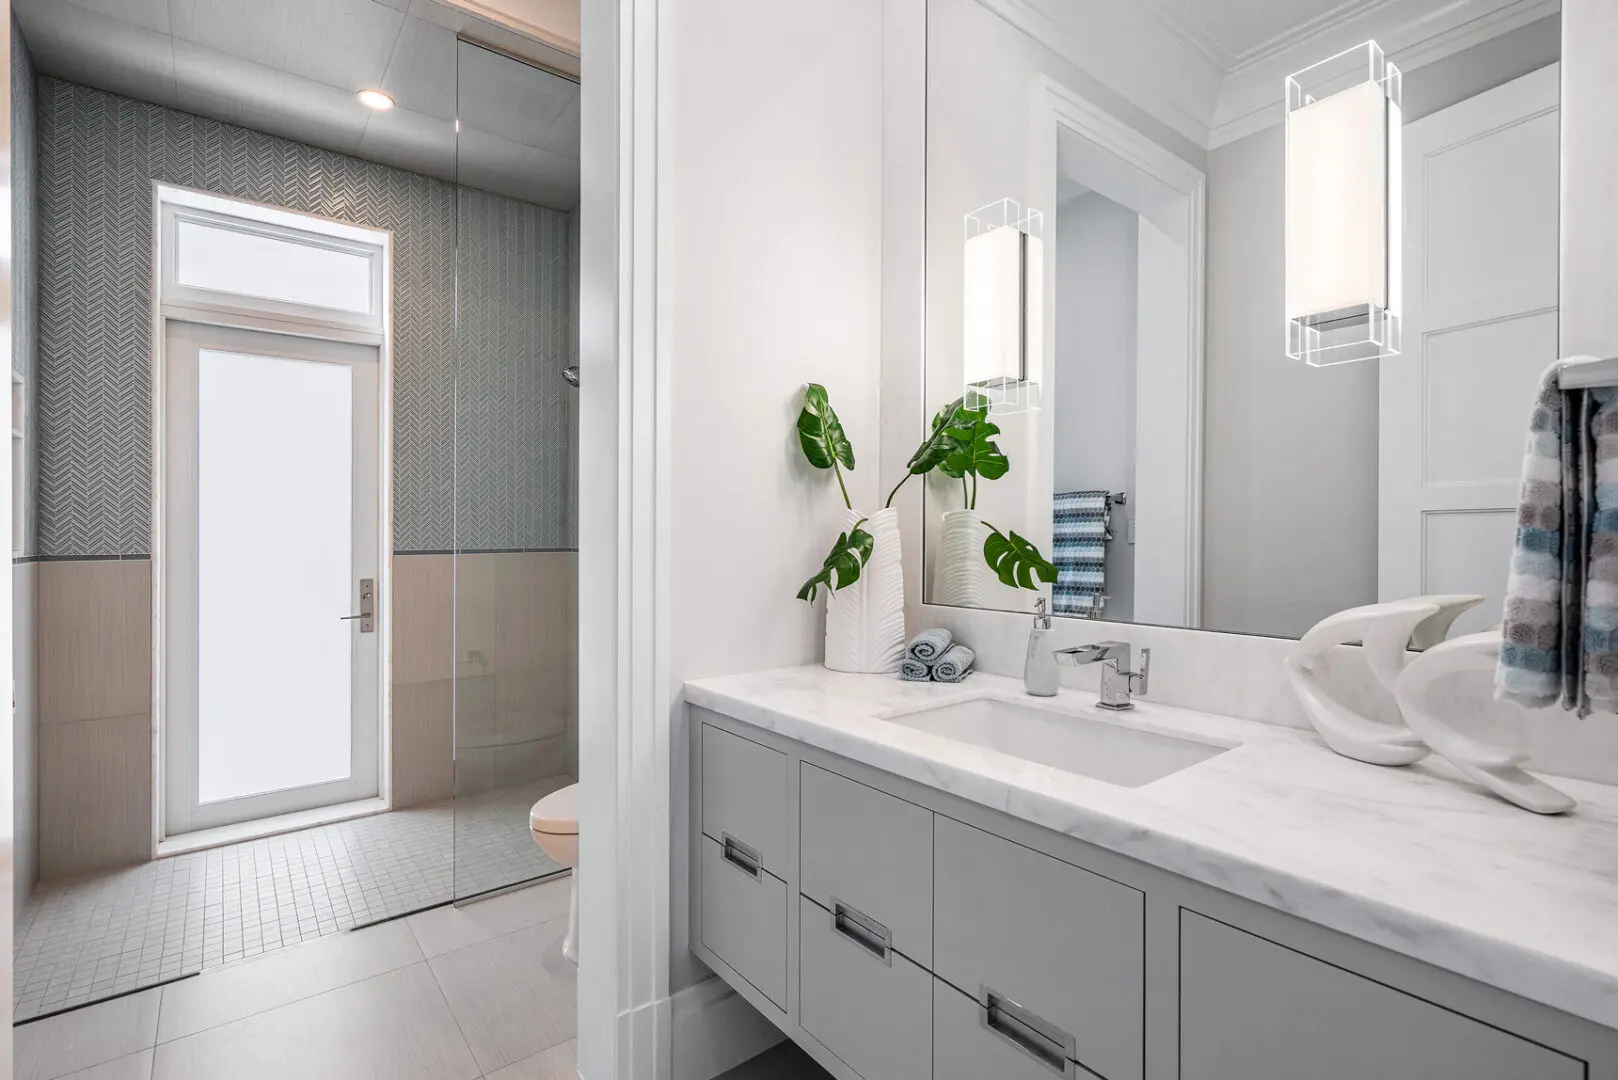 A bathroom with a large mirror and white counter.